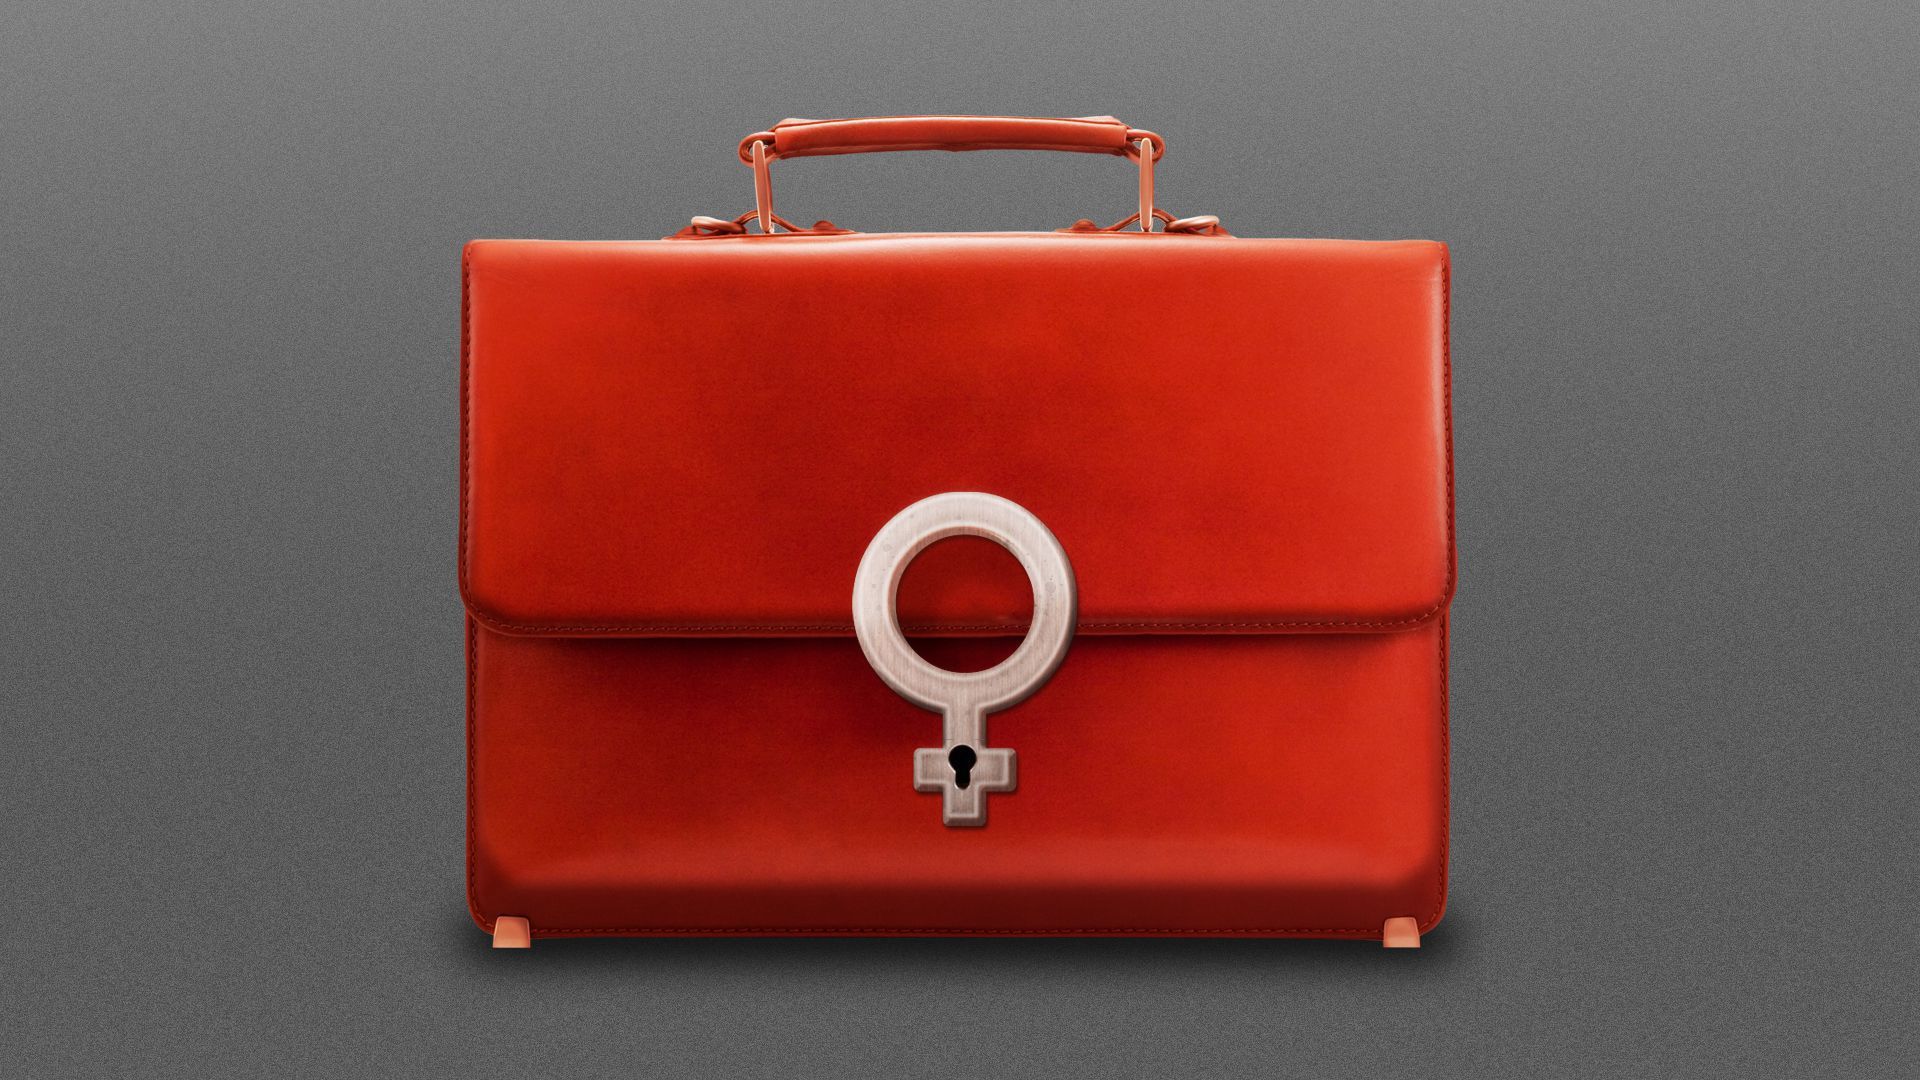 An image of a purse with the 'female' symbol.